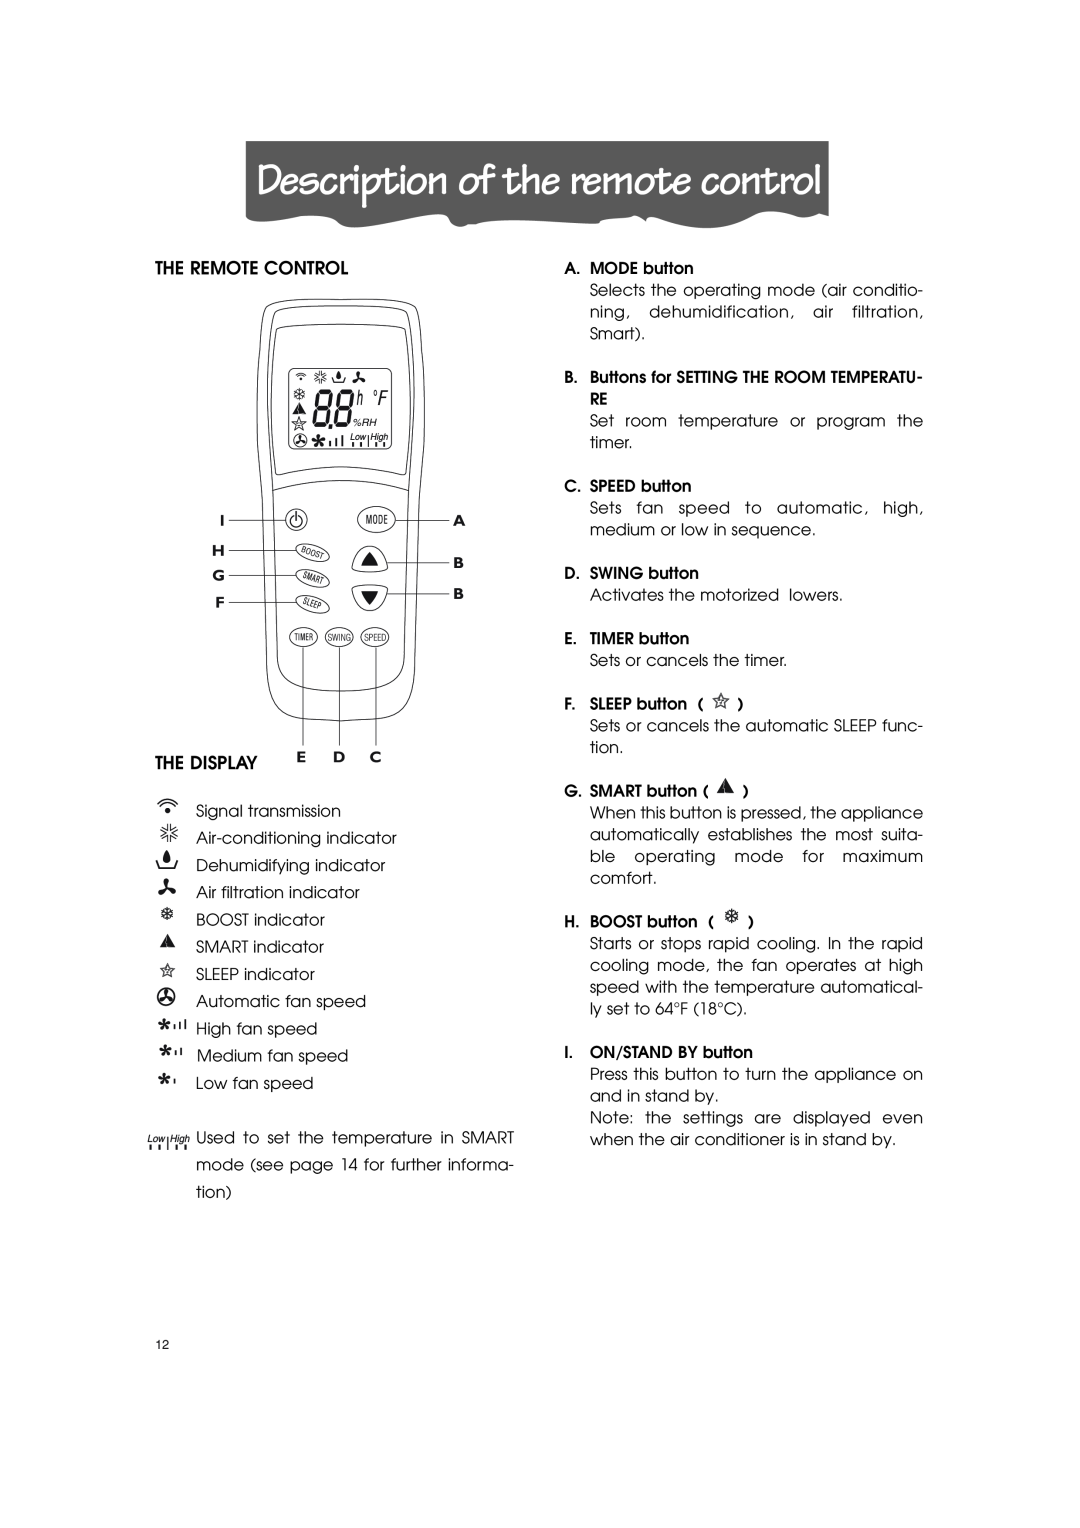 DeLonghi PACT100P, PACT110P specifications Description of the remote control, The Remote Control, The Display, H G F, E D C 